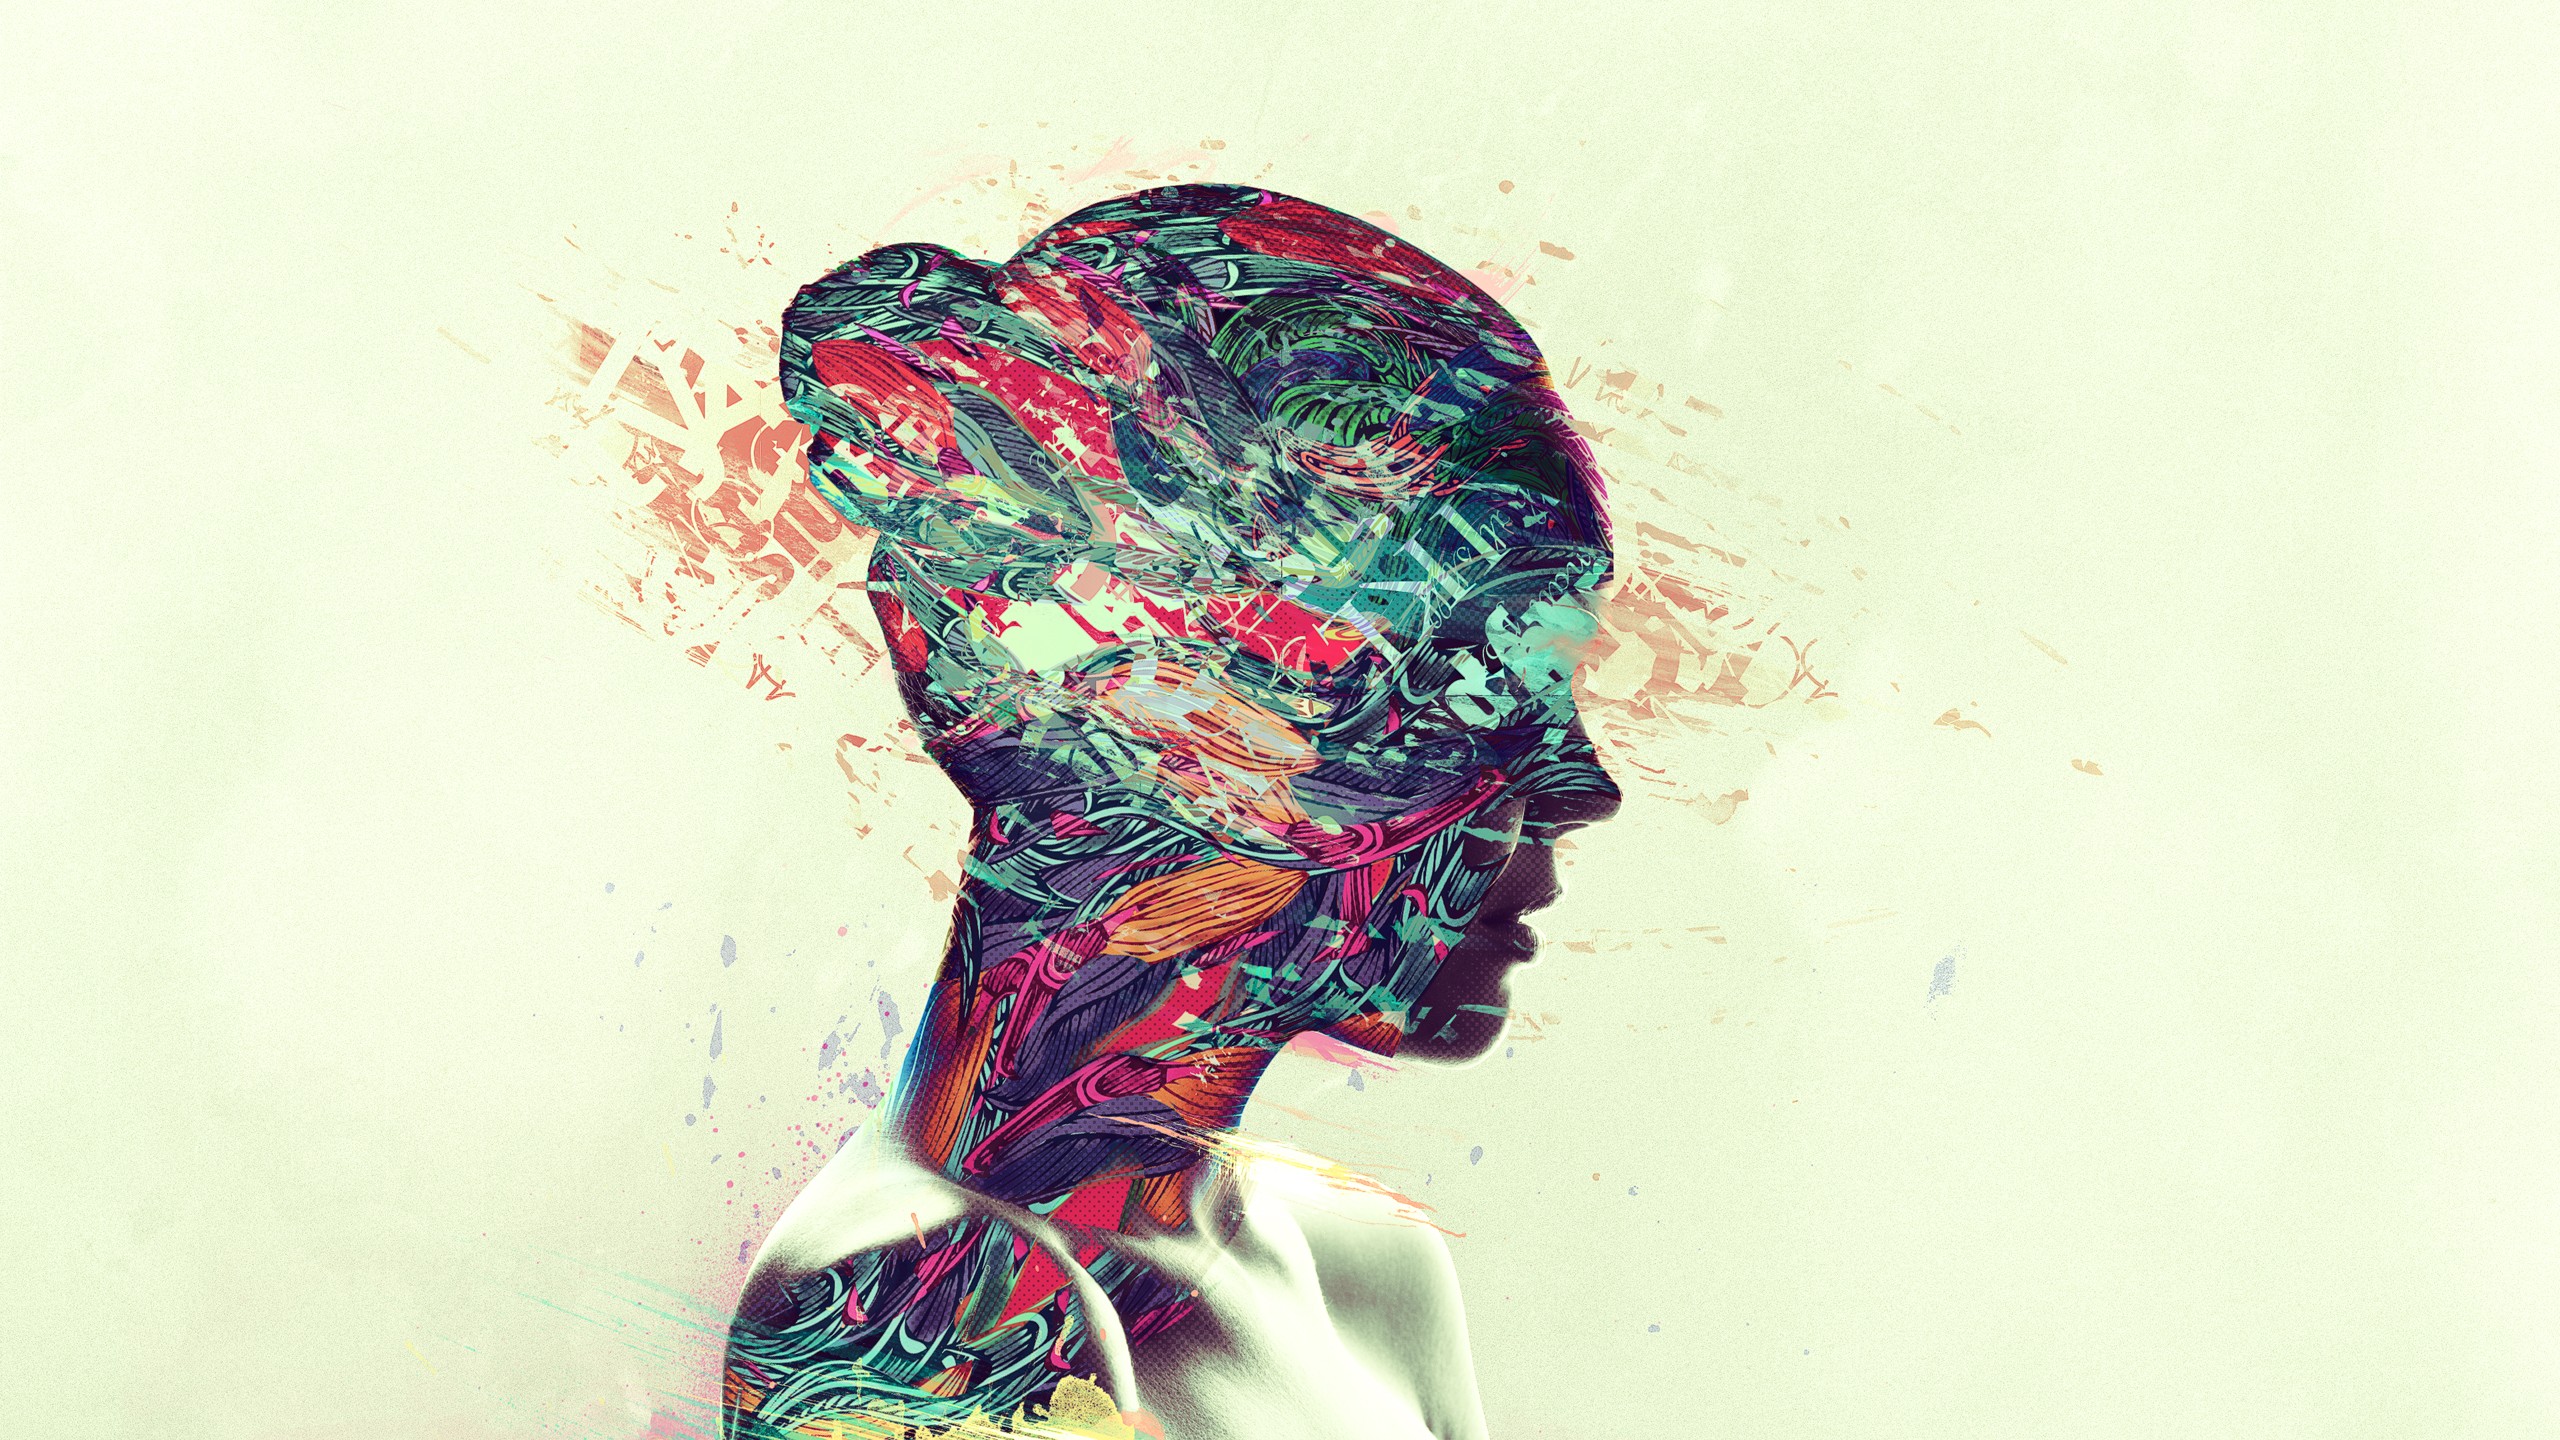 General 2560x1440 digital art women double exposure face bare shoulders white background colorful simple background artwork profile